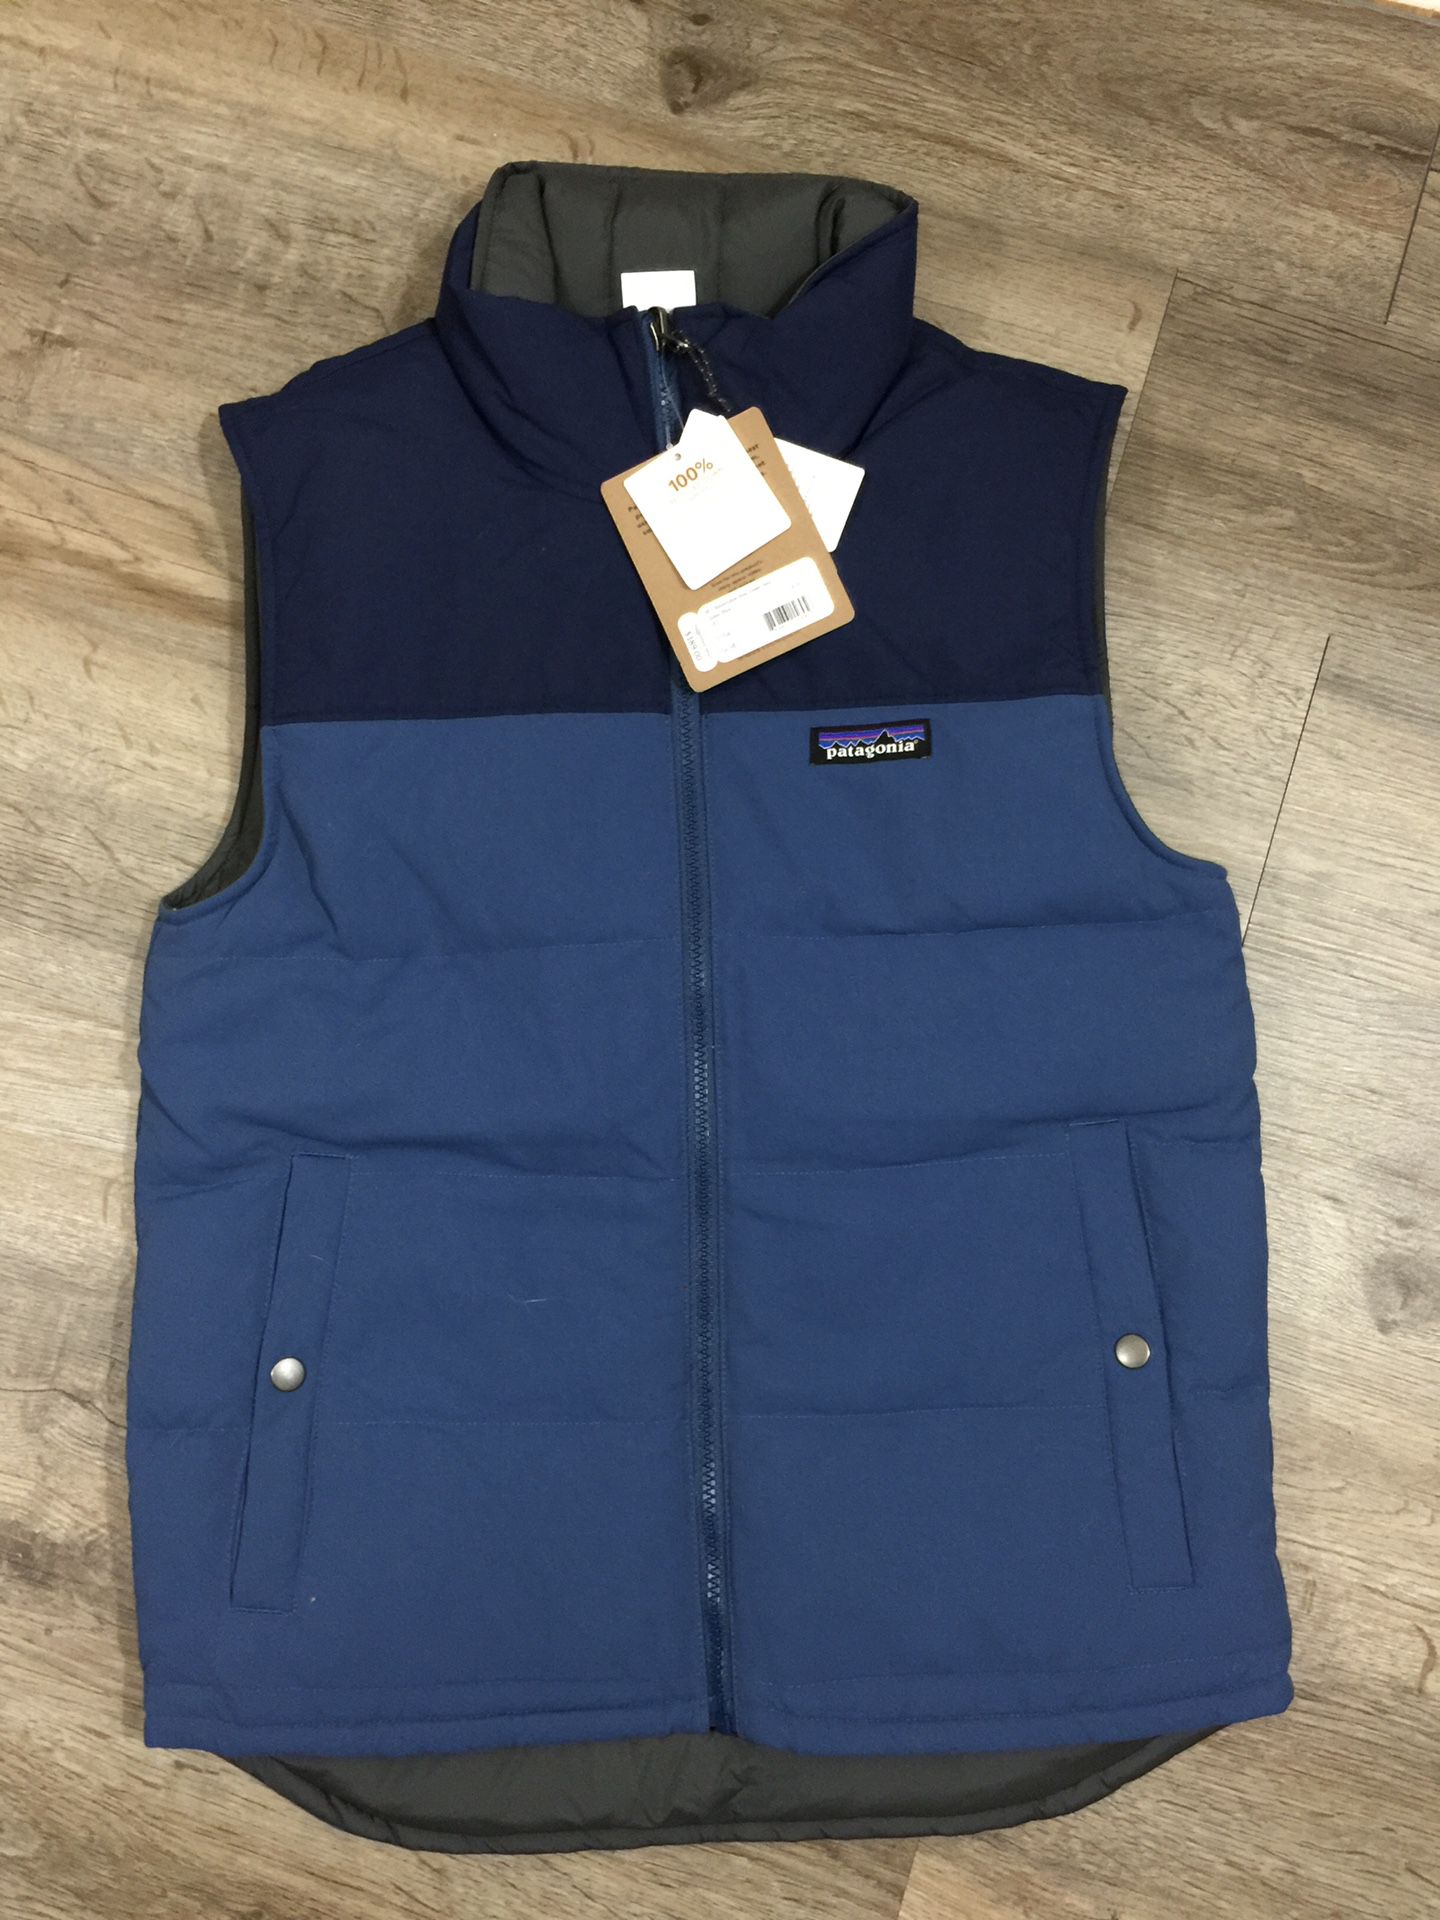 Patagonia Reversible Vest - Size XXS - New With Tags